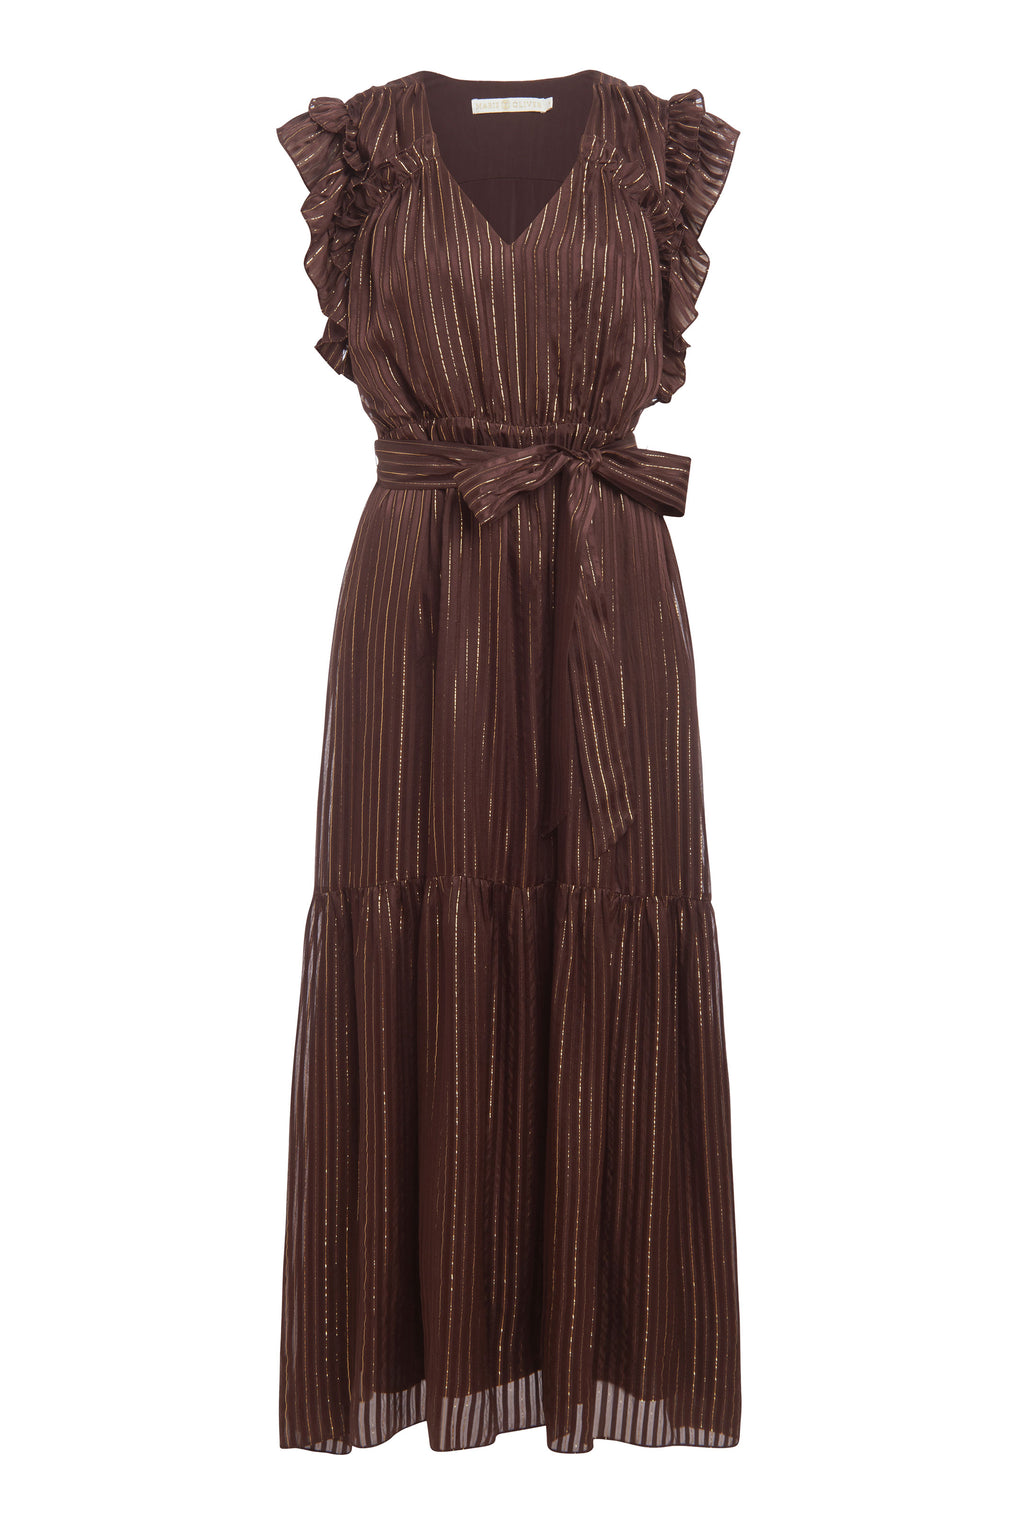 long dark brown dress with gold metallic stripes and a tied belt with ruffled shoulder sleeves